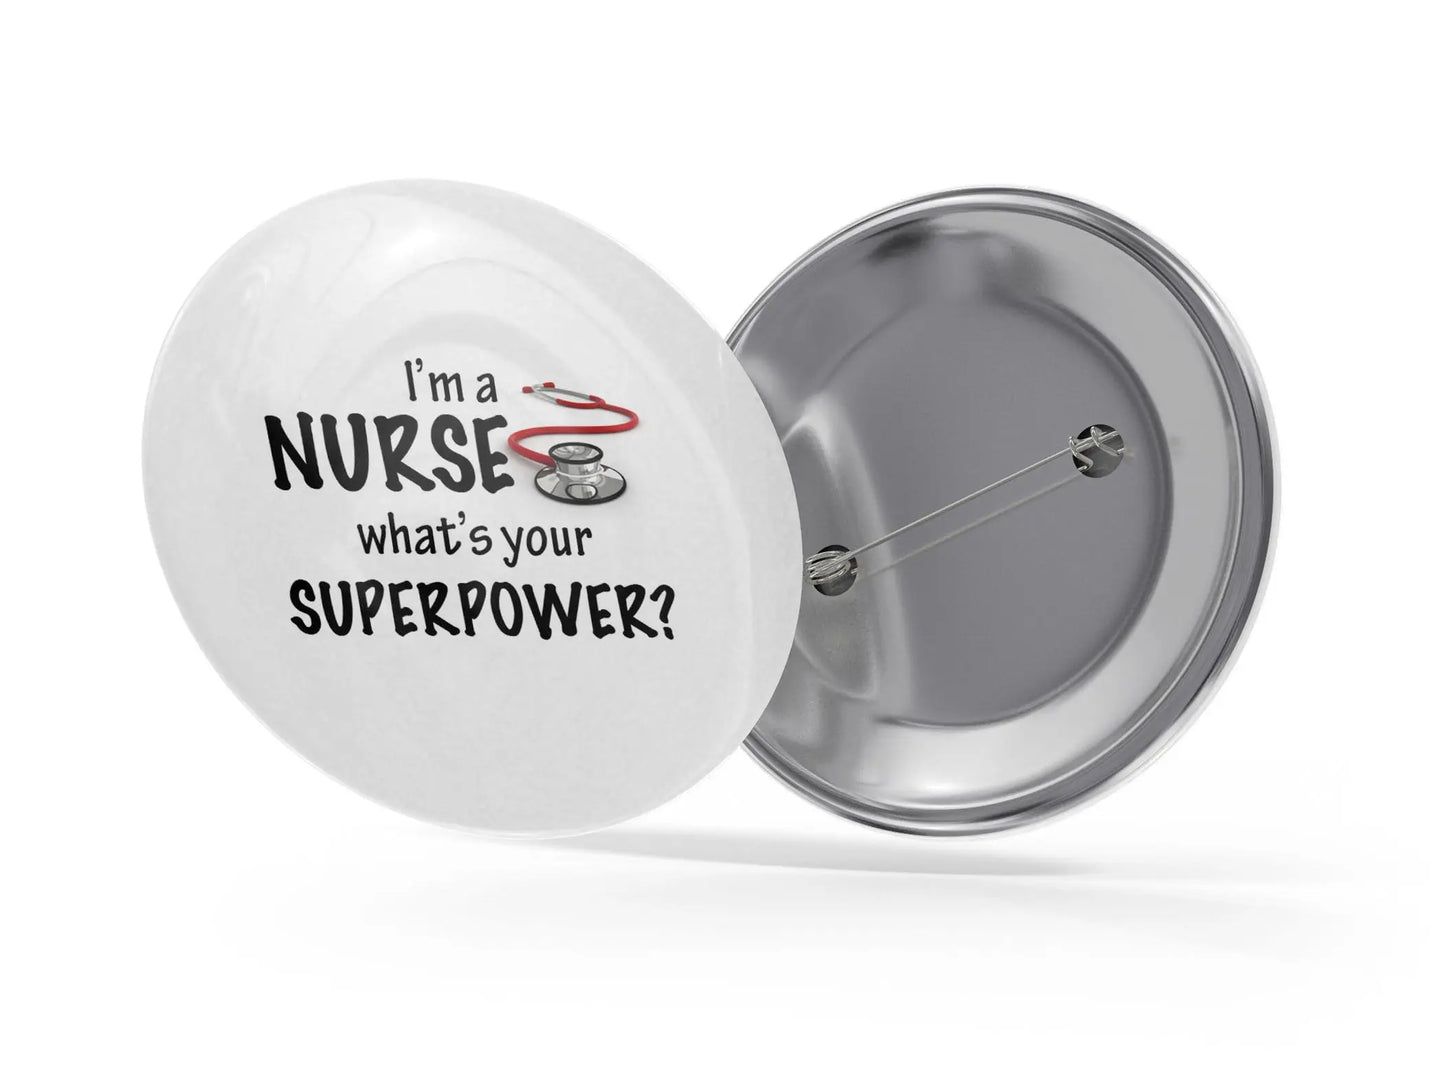 Nurse Superpower - Medical Nurse Badge - Health Personalized Giveaways - Profession Career Button Pins - 10 pieces